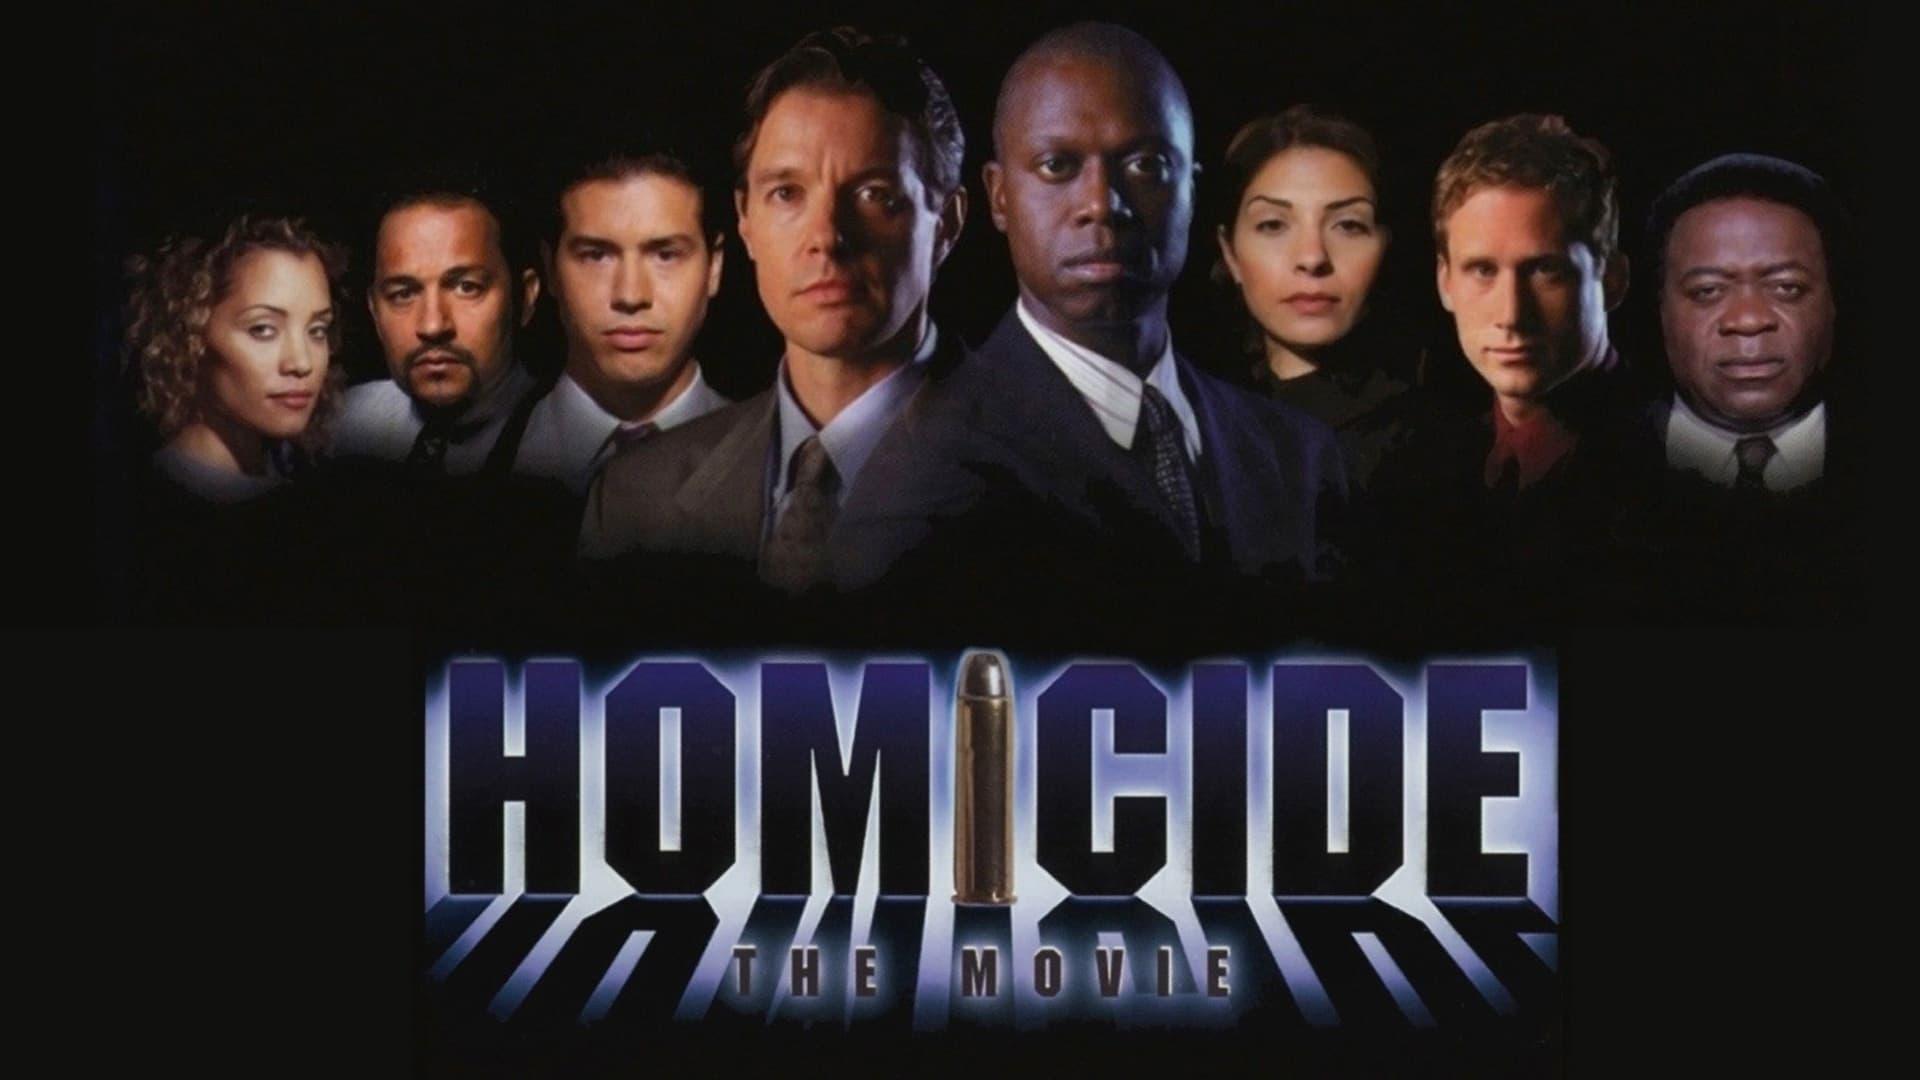 Homicide: The Movie backdrop